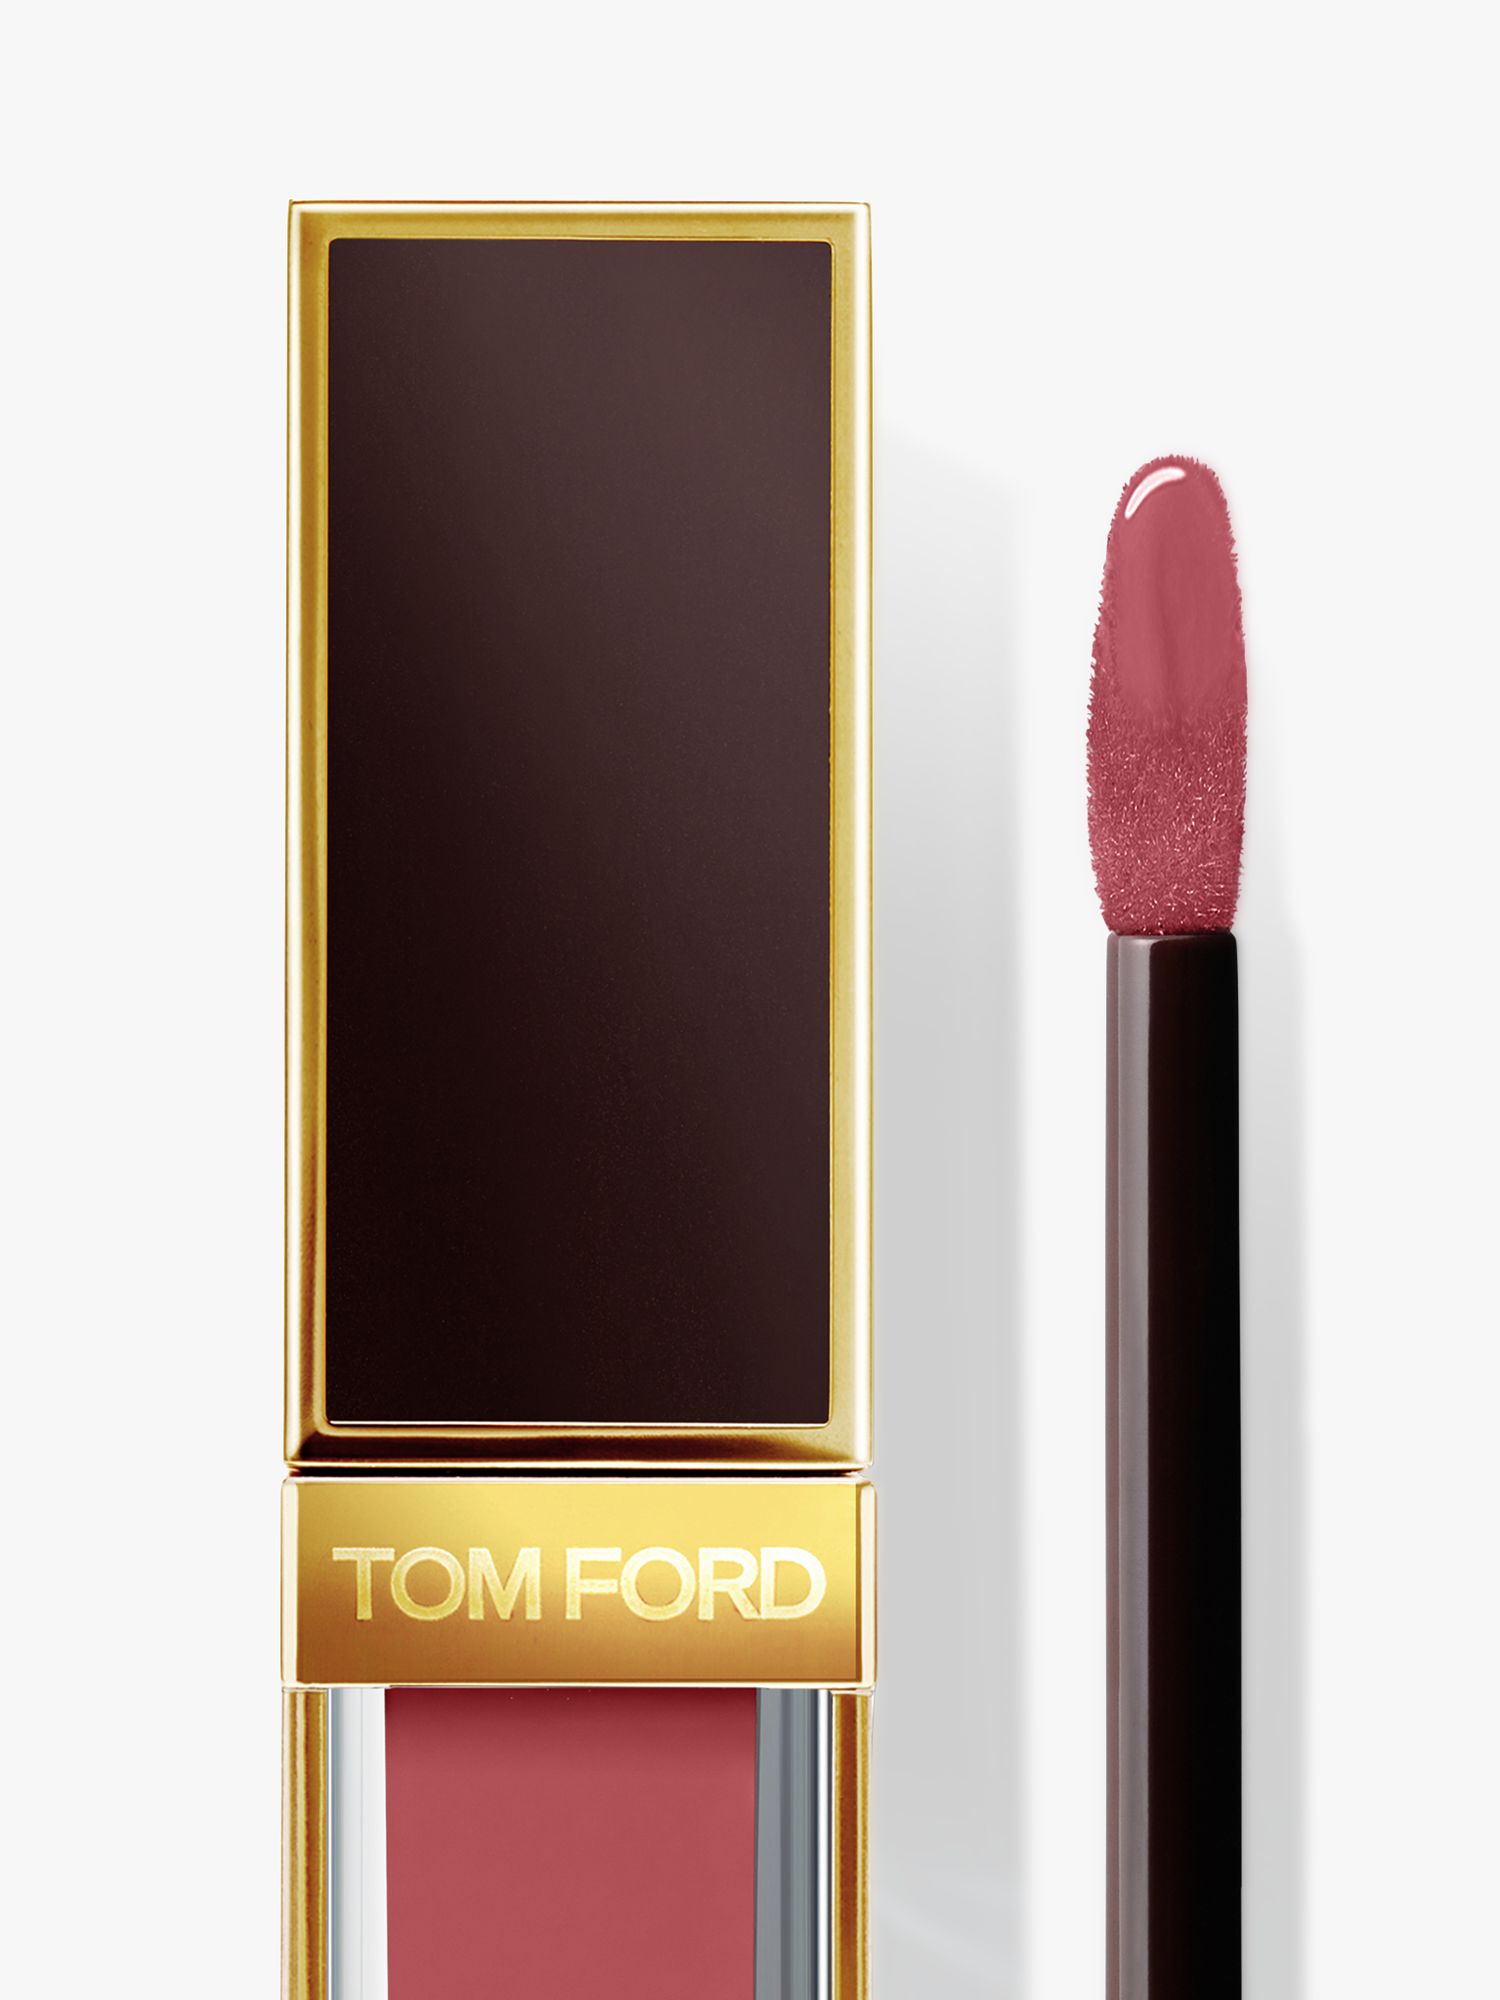 TOM FORD Gloss Luxe, 22 Sunrise Pink at John Lewis & Partners